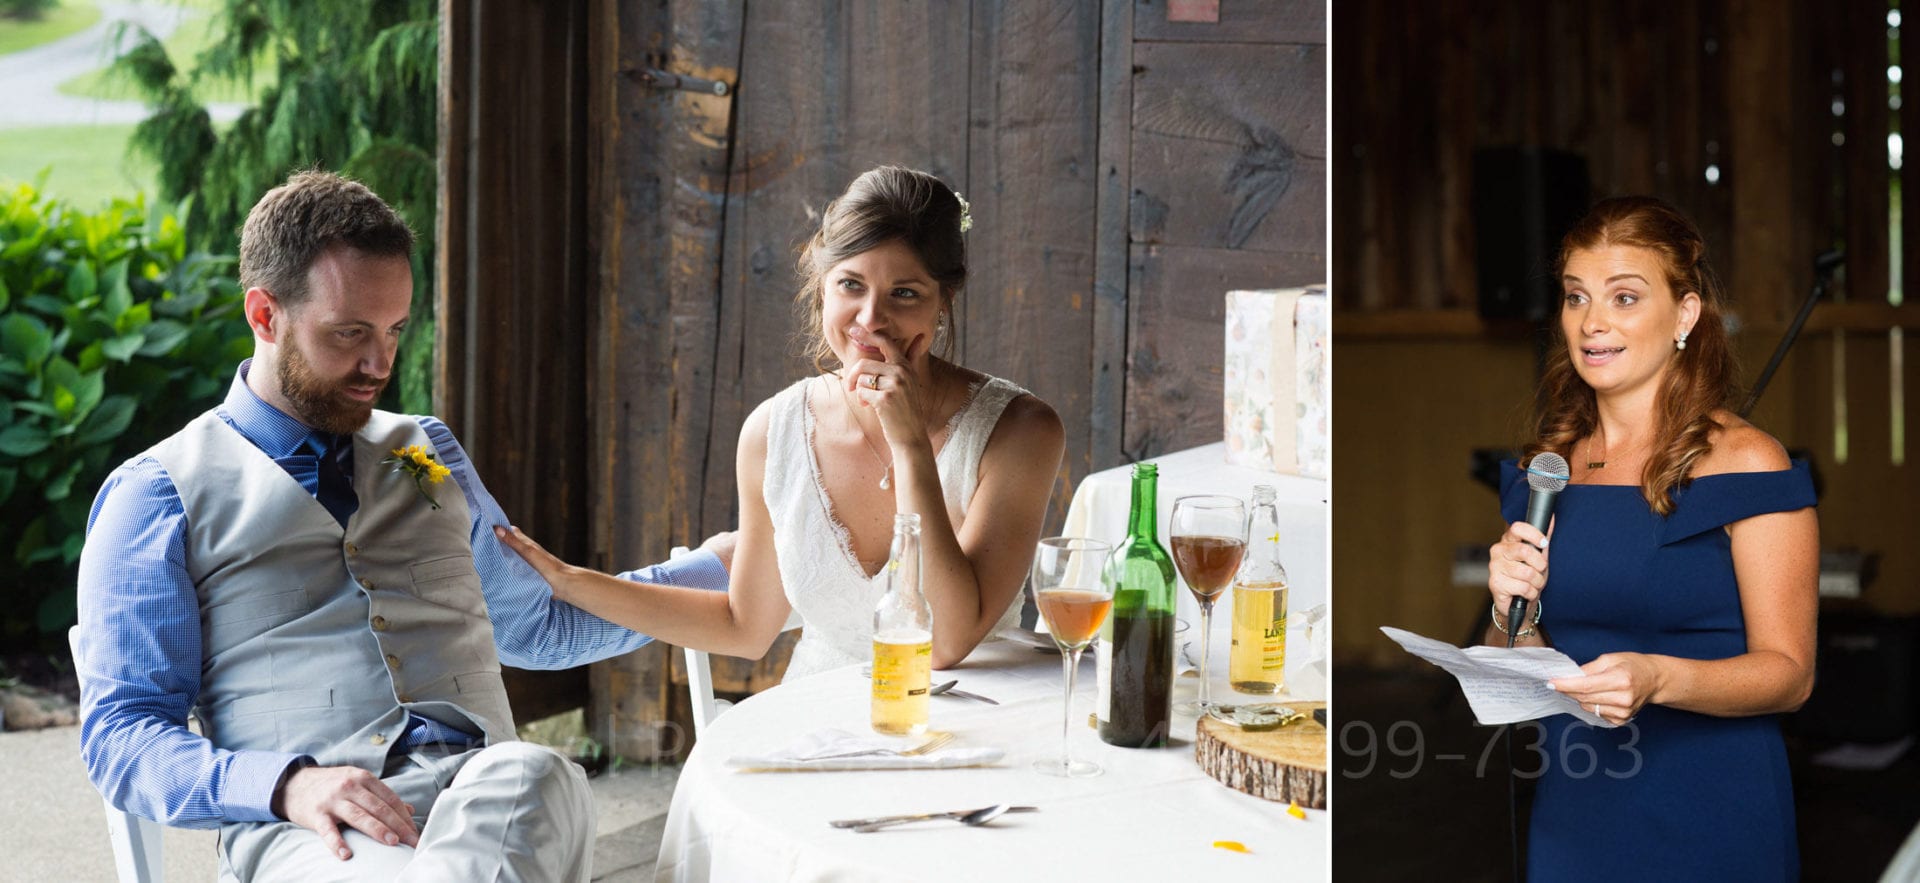 Two photos: a bride and groom sit at a table near the door of a barn. The bride holds her hand to her face as she shows emotion while the woman in the second photo gives a speech.